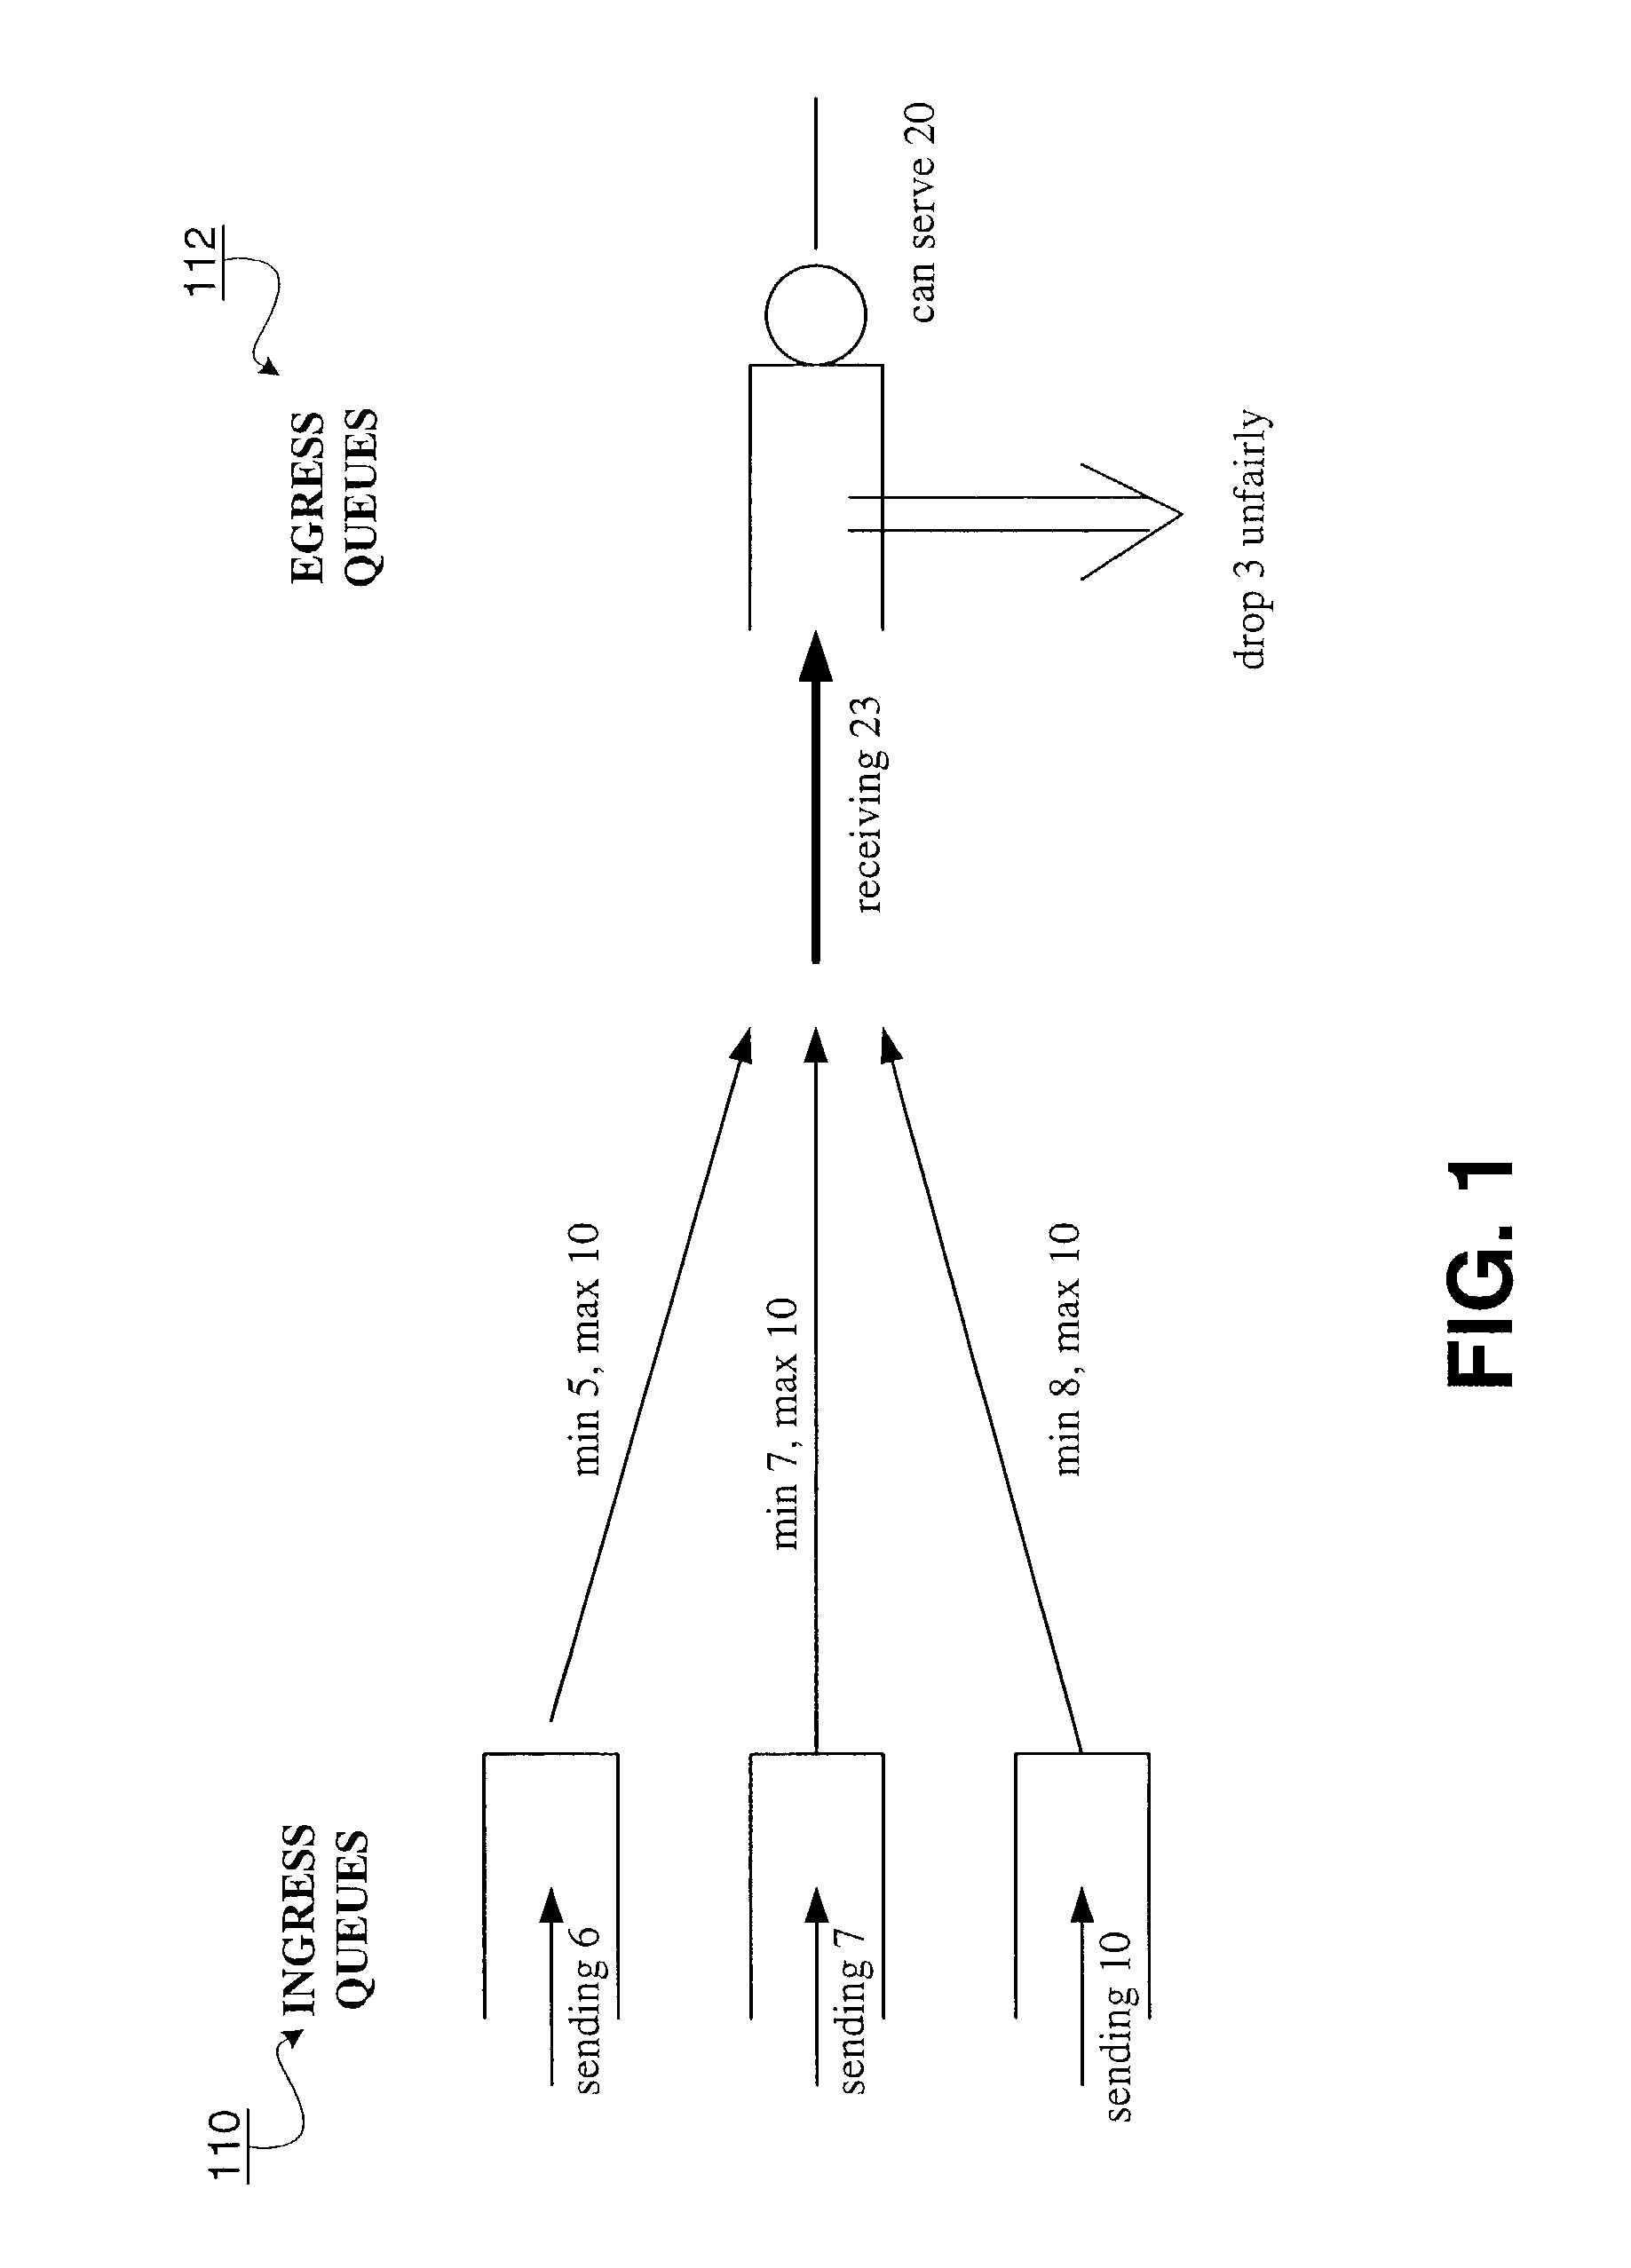 Method and apparatus for providing quality of service across a switched backplane between egress and ingress queue managers